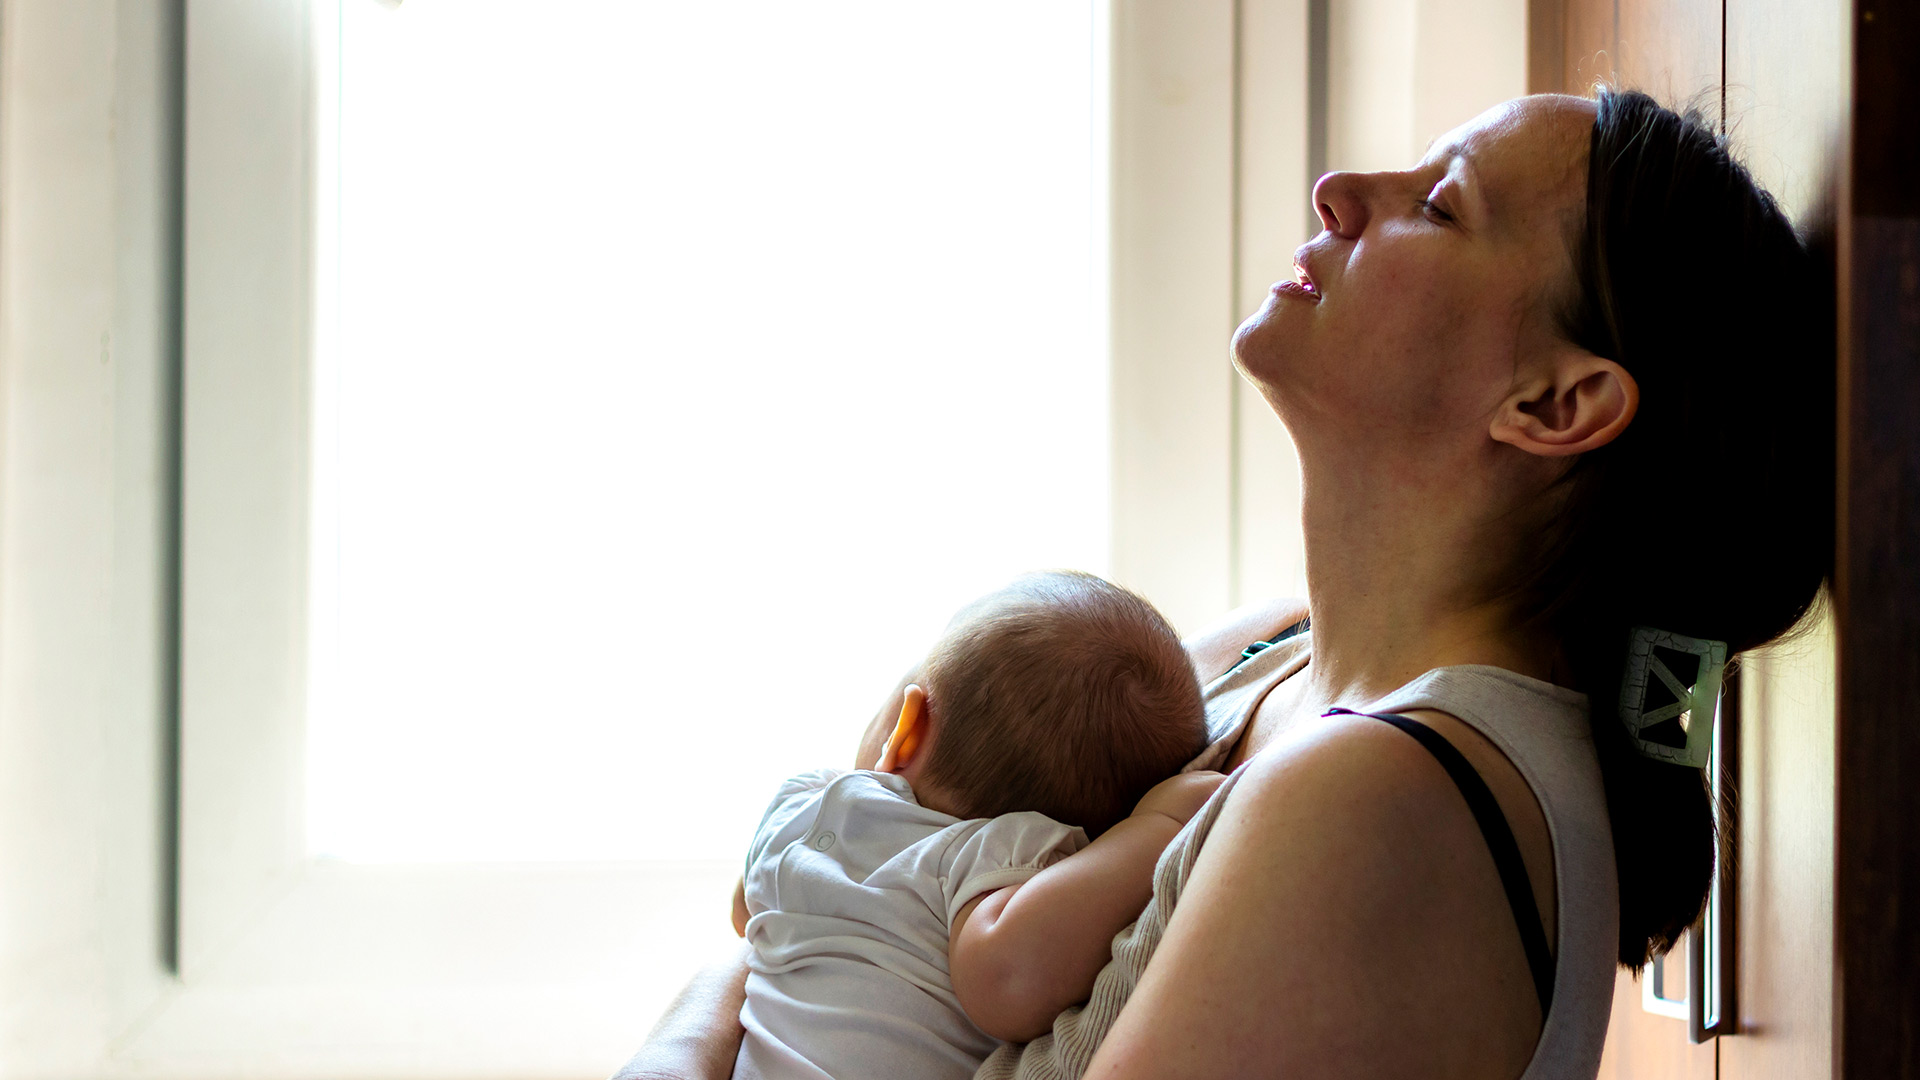 Women are facing more challenges than ever during COVID-19. Explore underlying issues and risk factors for depression and/or anxiety while pregnant or postpartum. And learn 10 ways to get the most out of motherhood, even during the pandemic.  